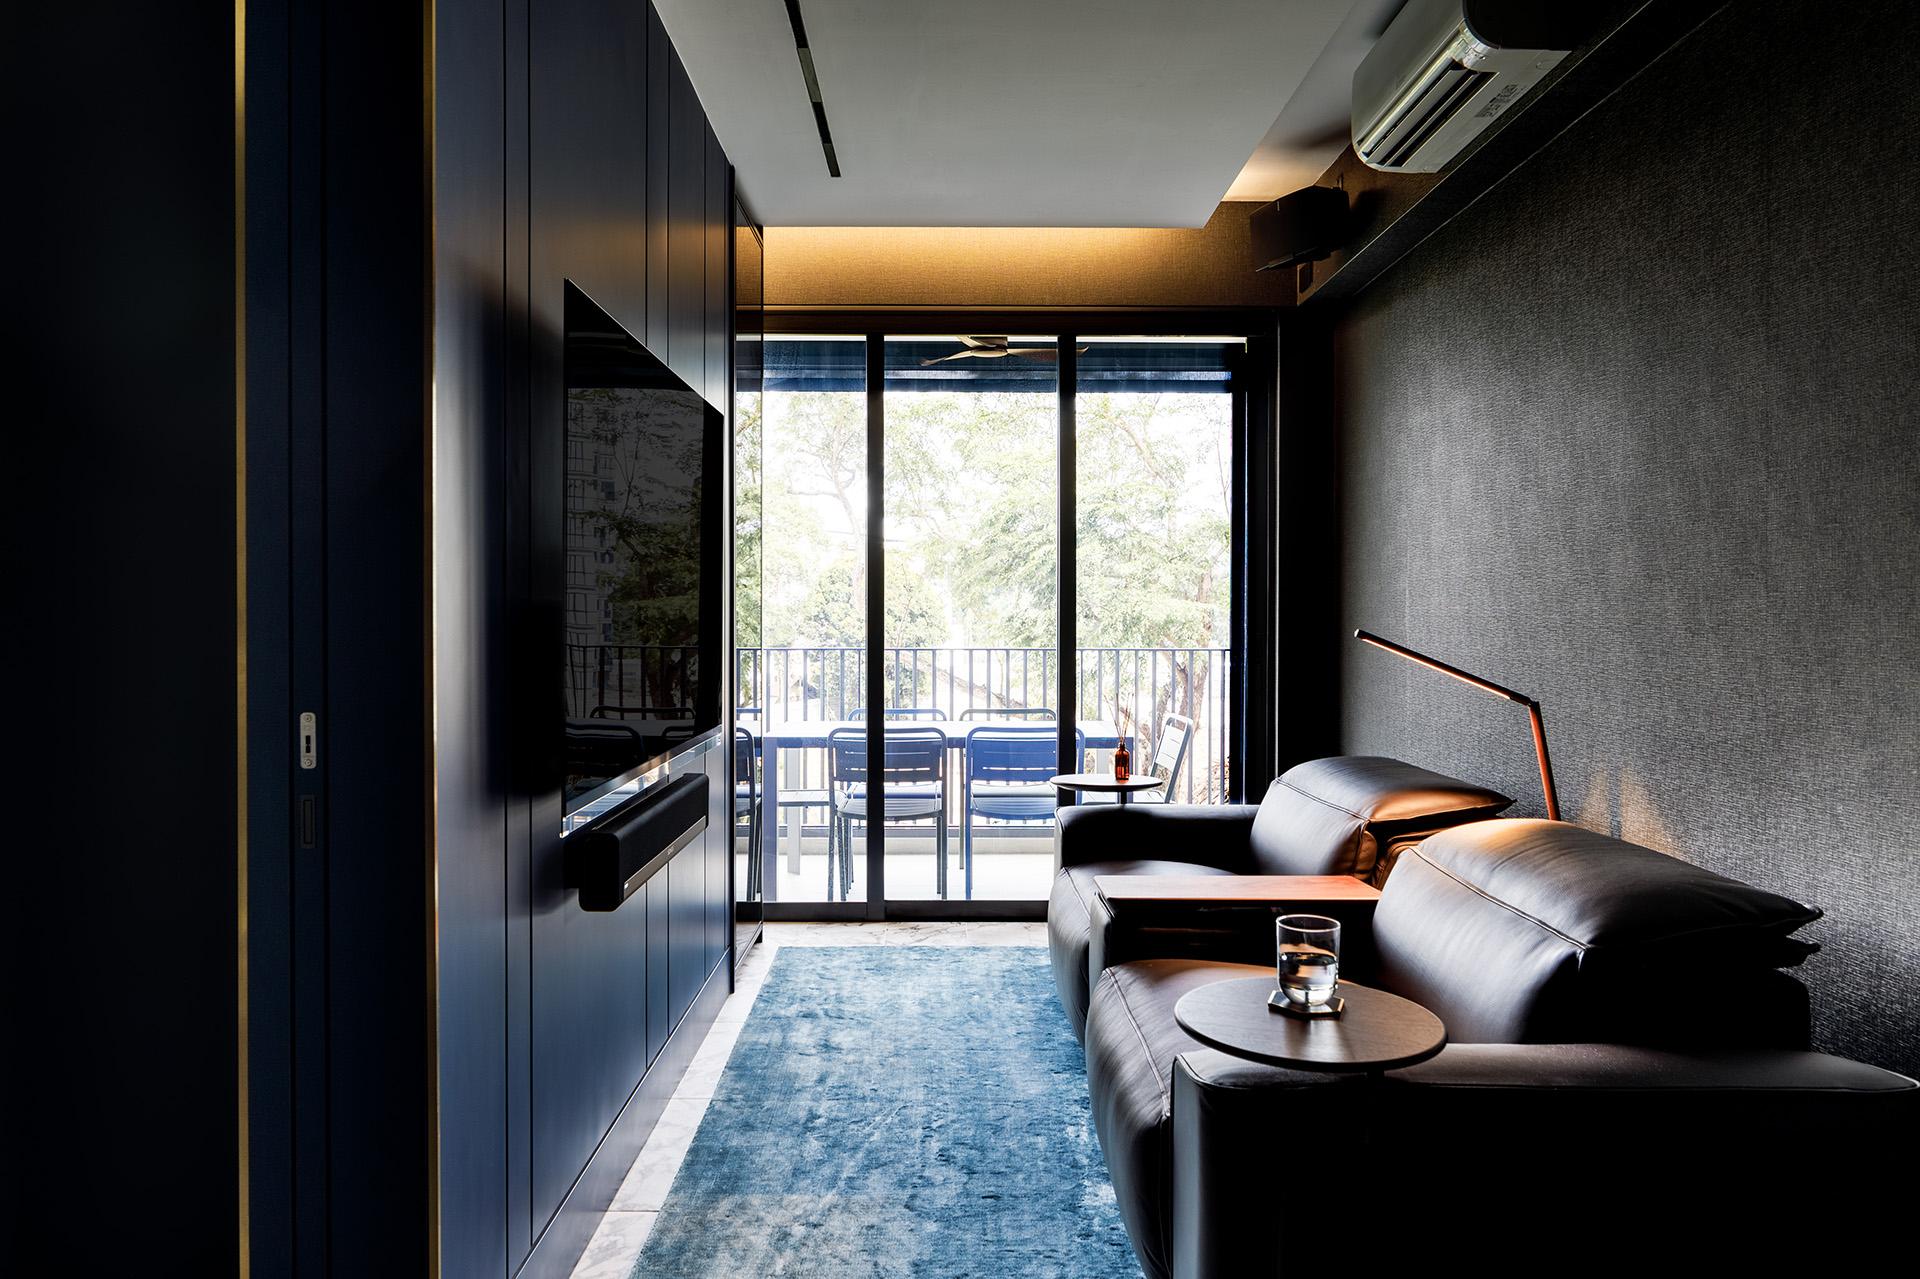 Step Inside this 667 sqft Modern Luxe Bachelor Pad in Singapore